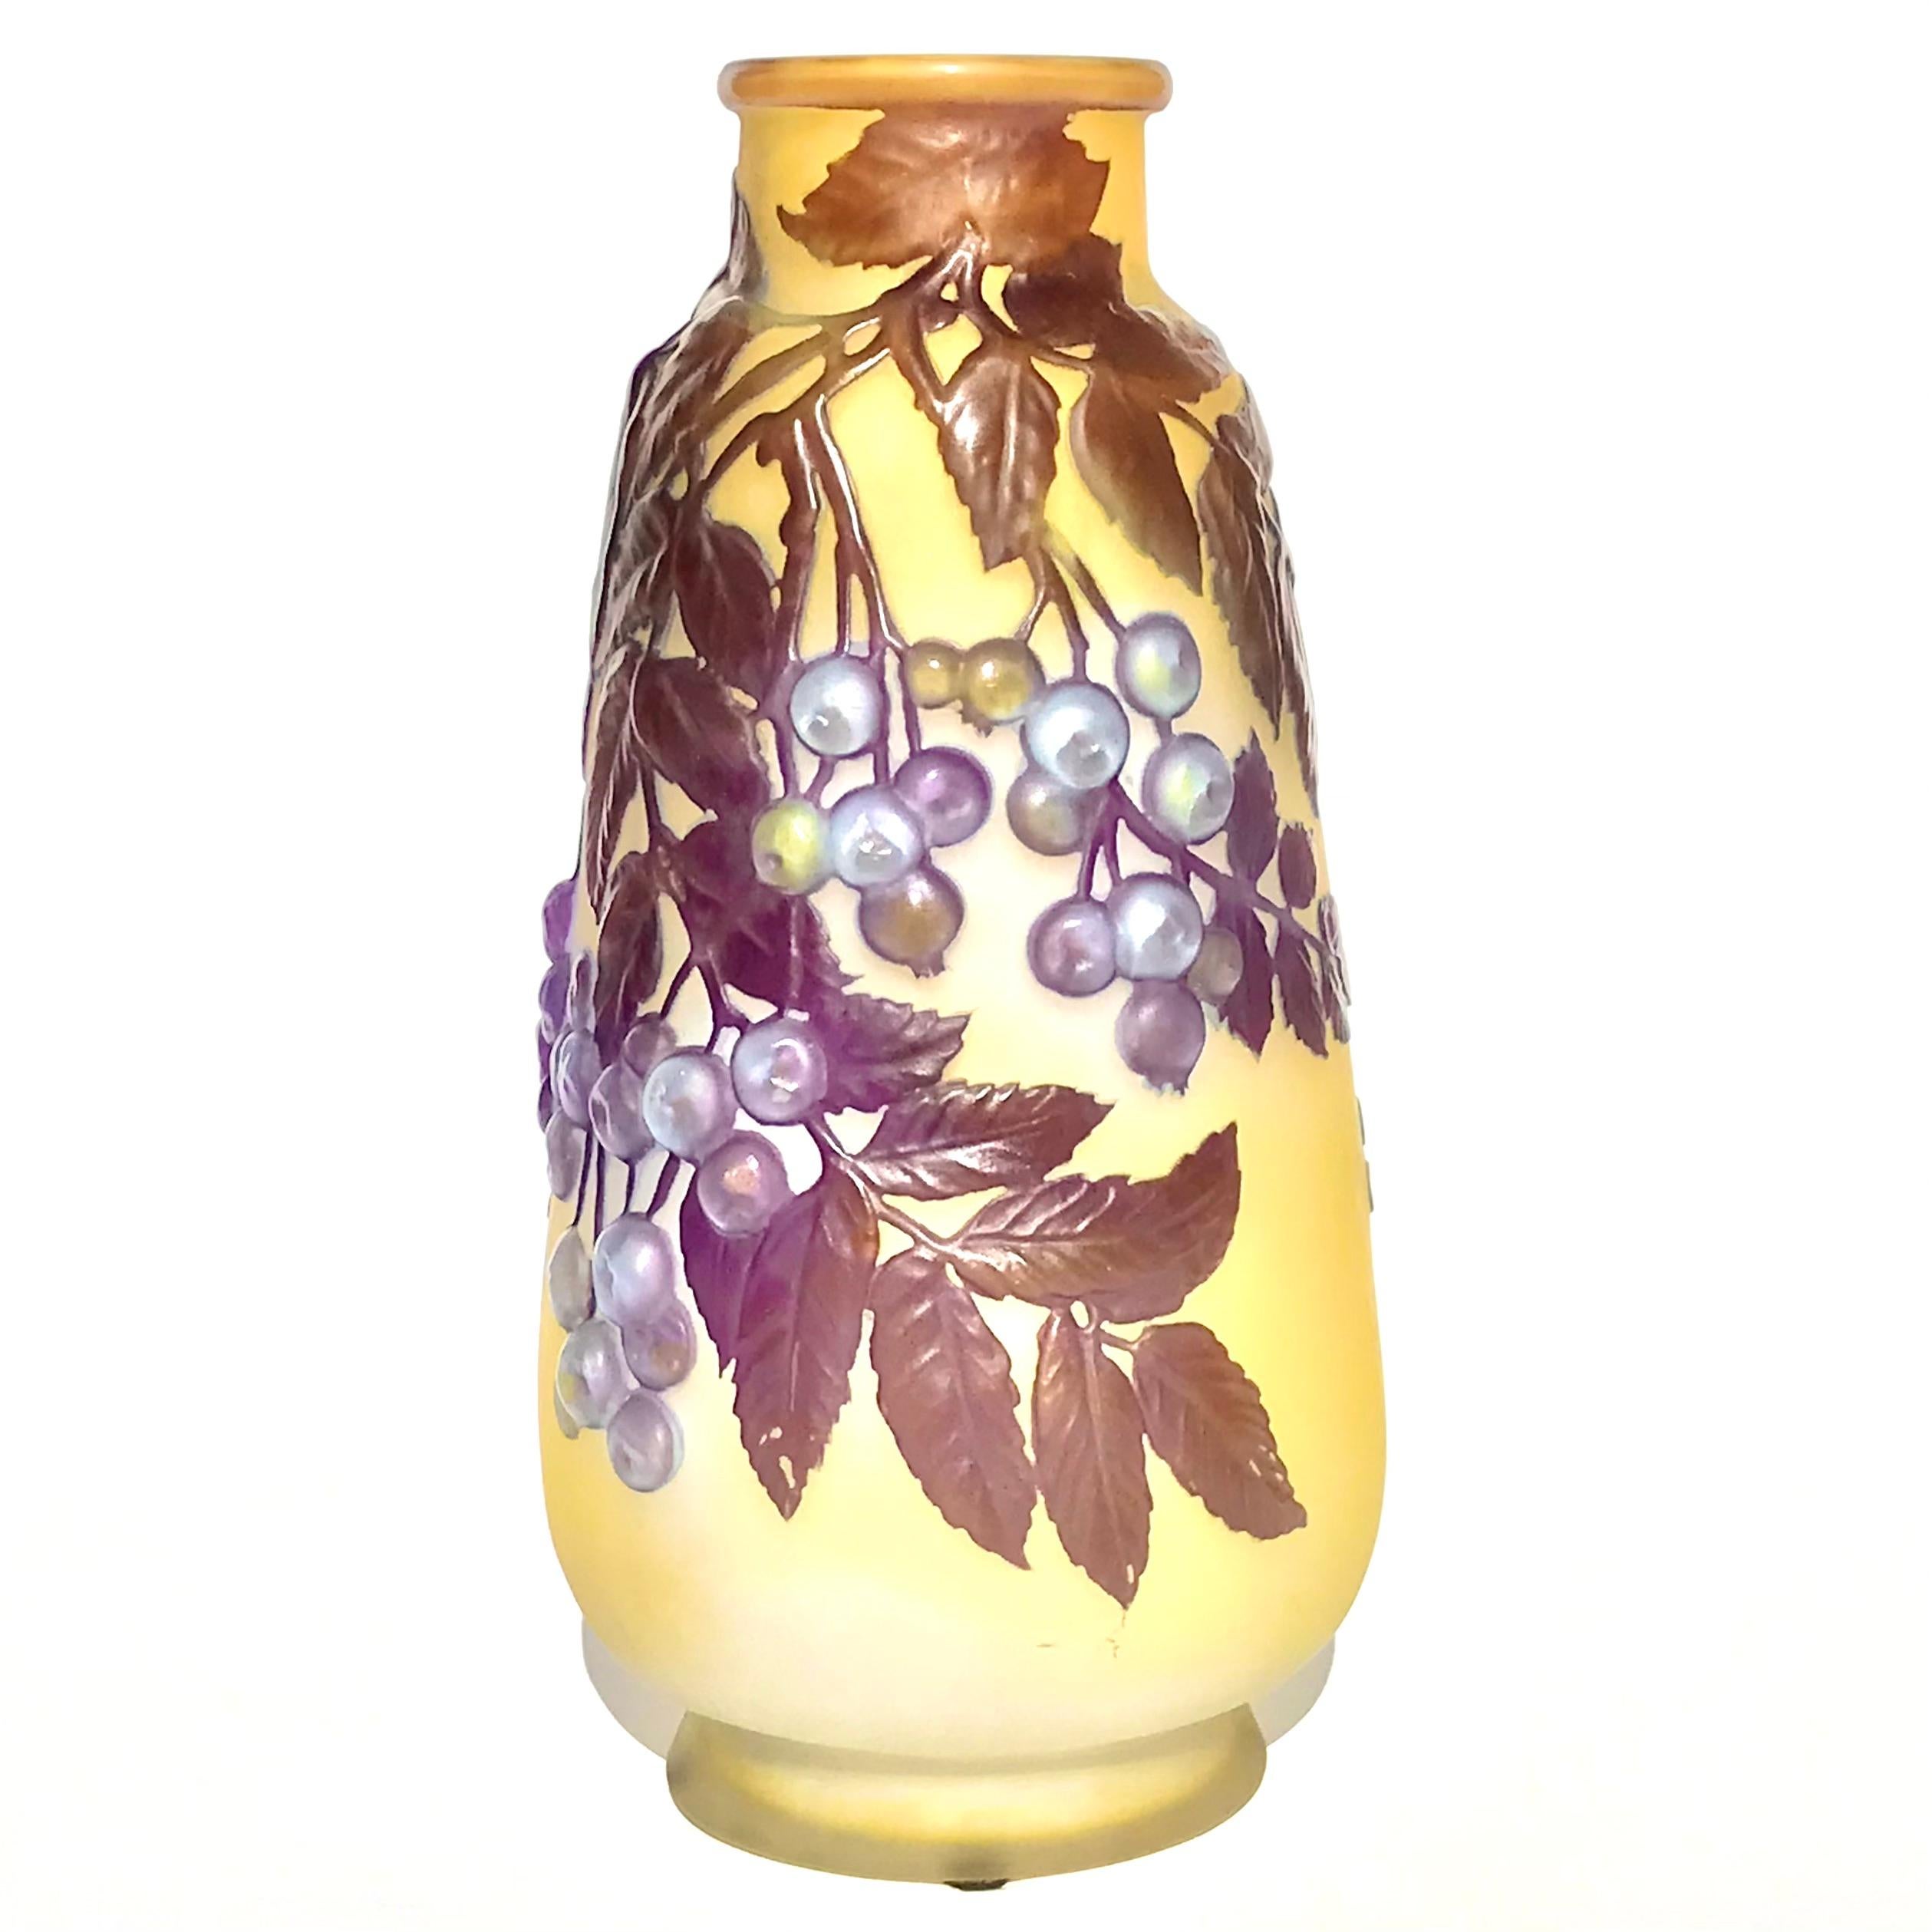 Emile Galle French Art Nouveau Soufflé Berry Vase In Good Condition For Sale In Dallas, TX